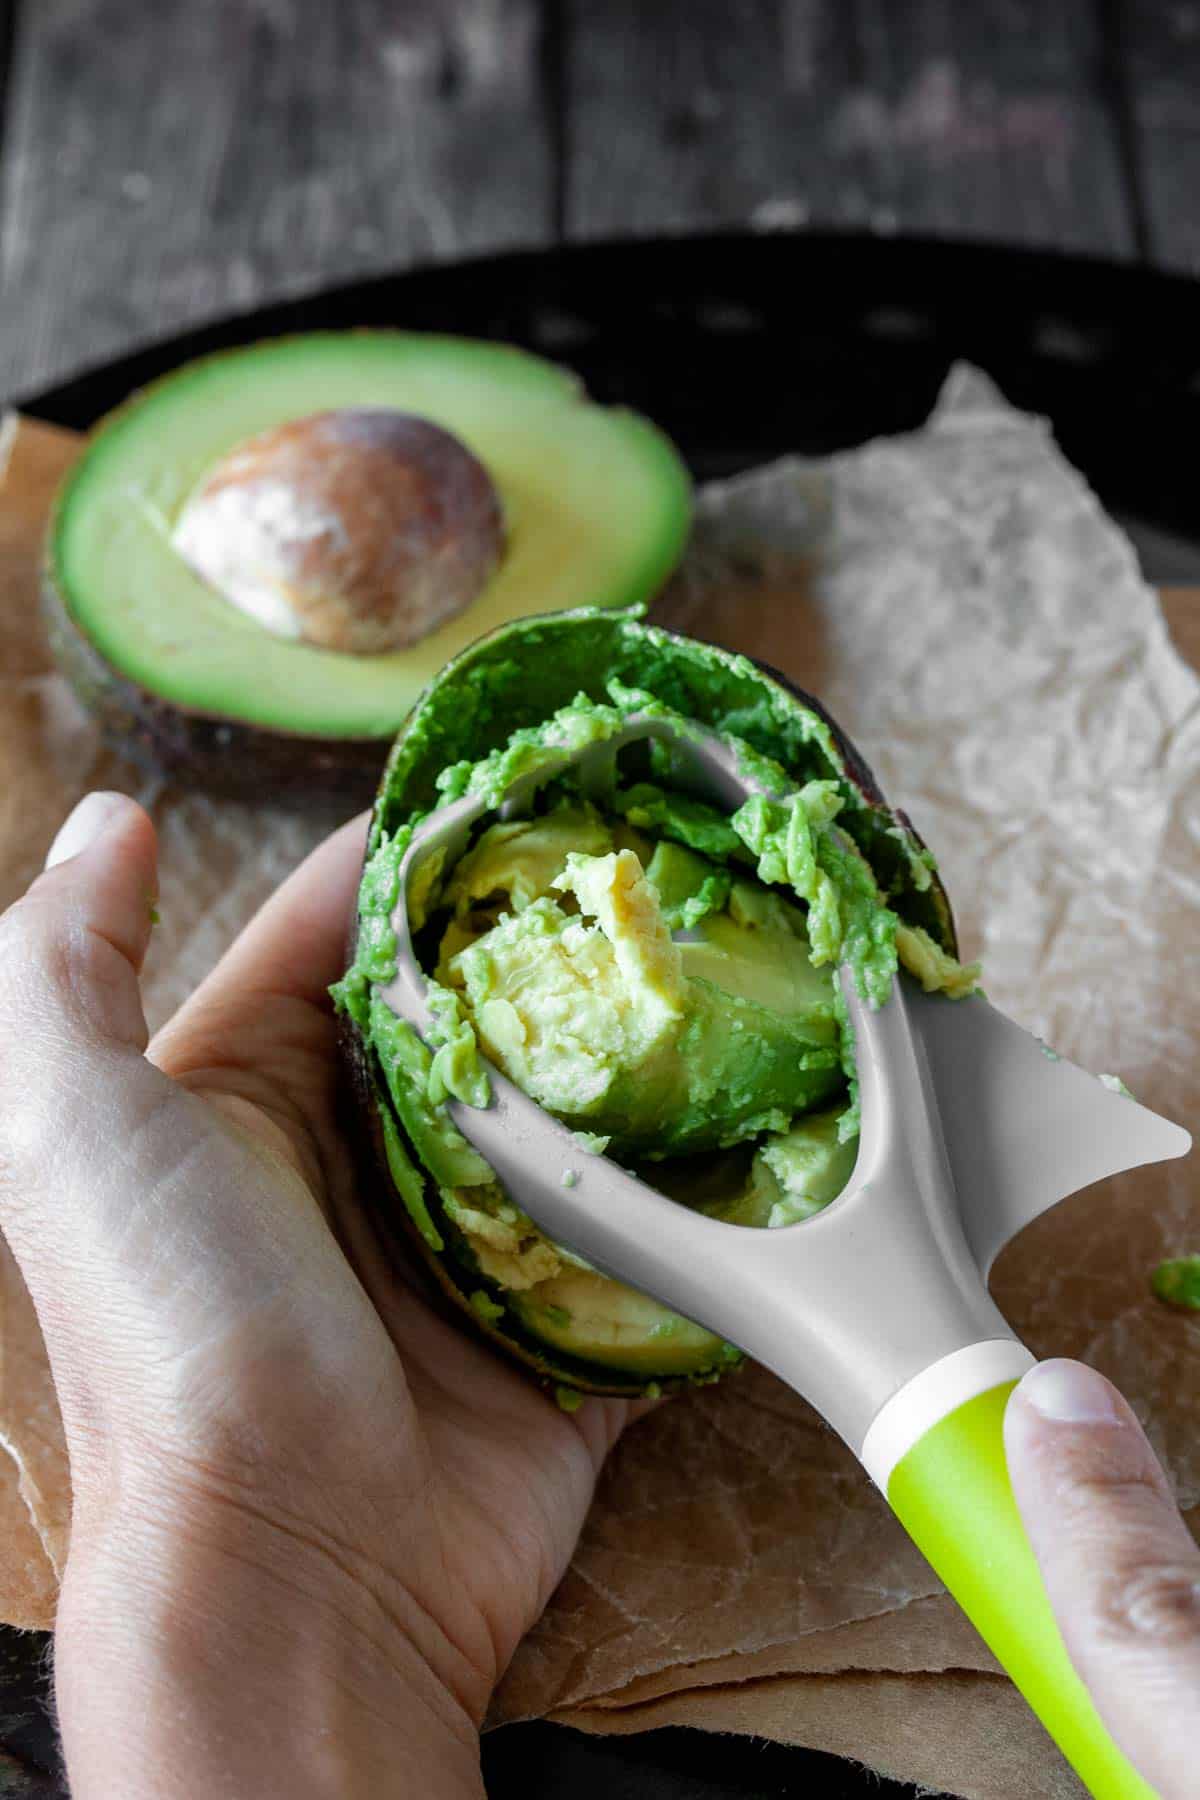 Kitchen tool scraping avocado from a half avocado being held in the palm of a hand.